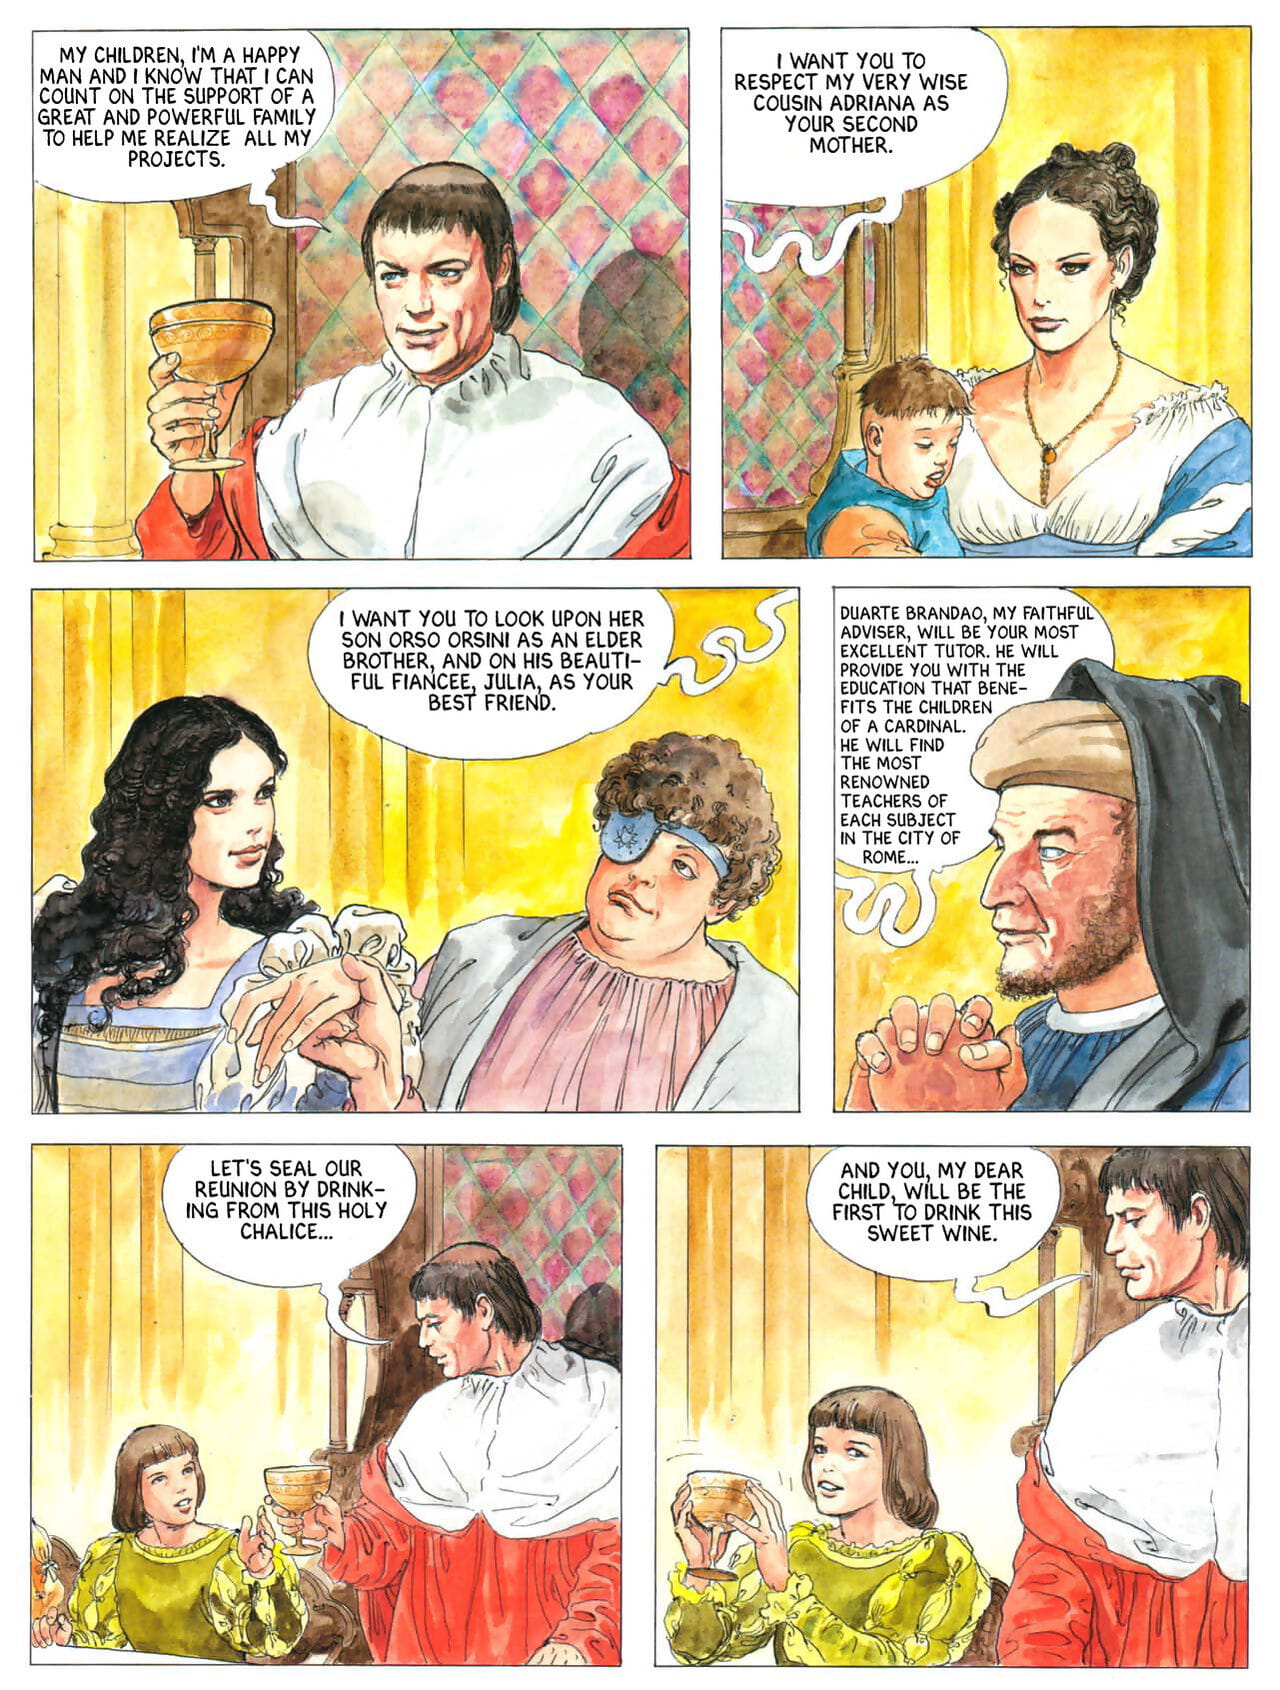 Borgia - Blood for the Pope page 1